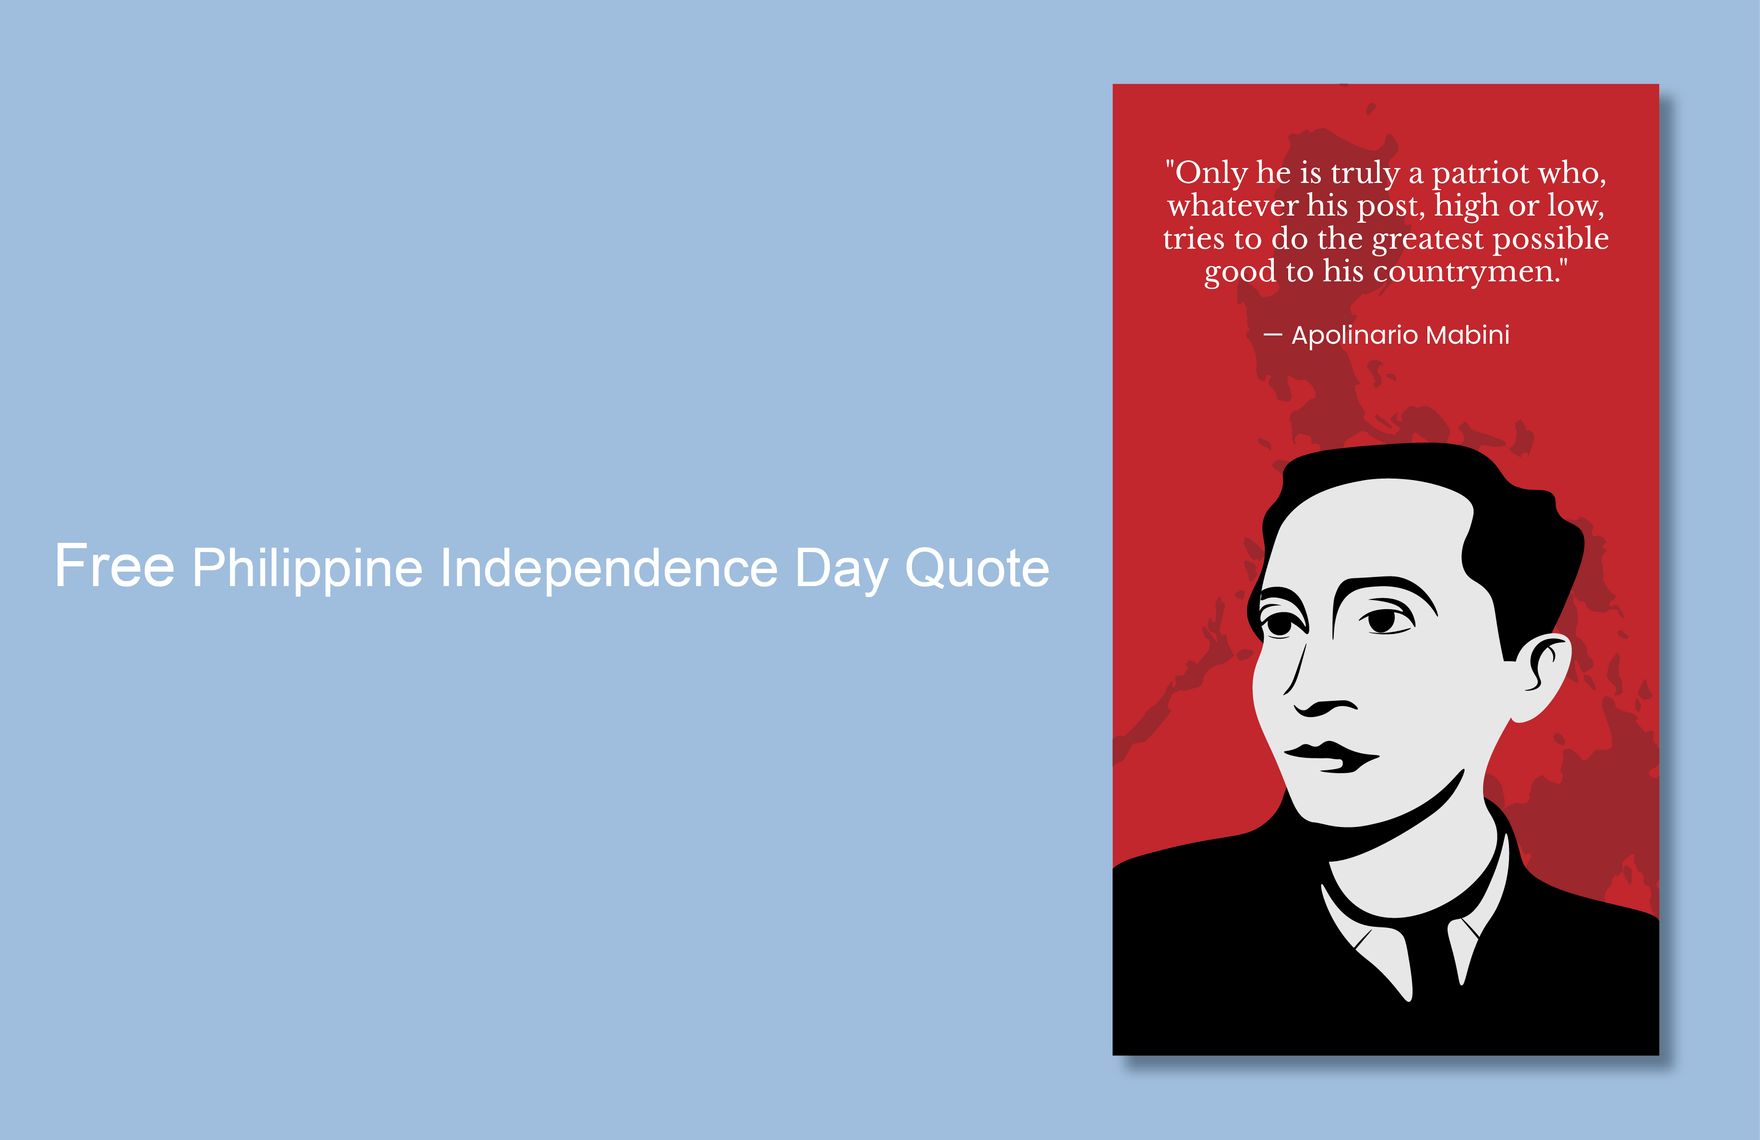 Free Philippine Independence Day Quote